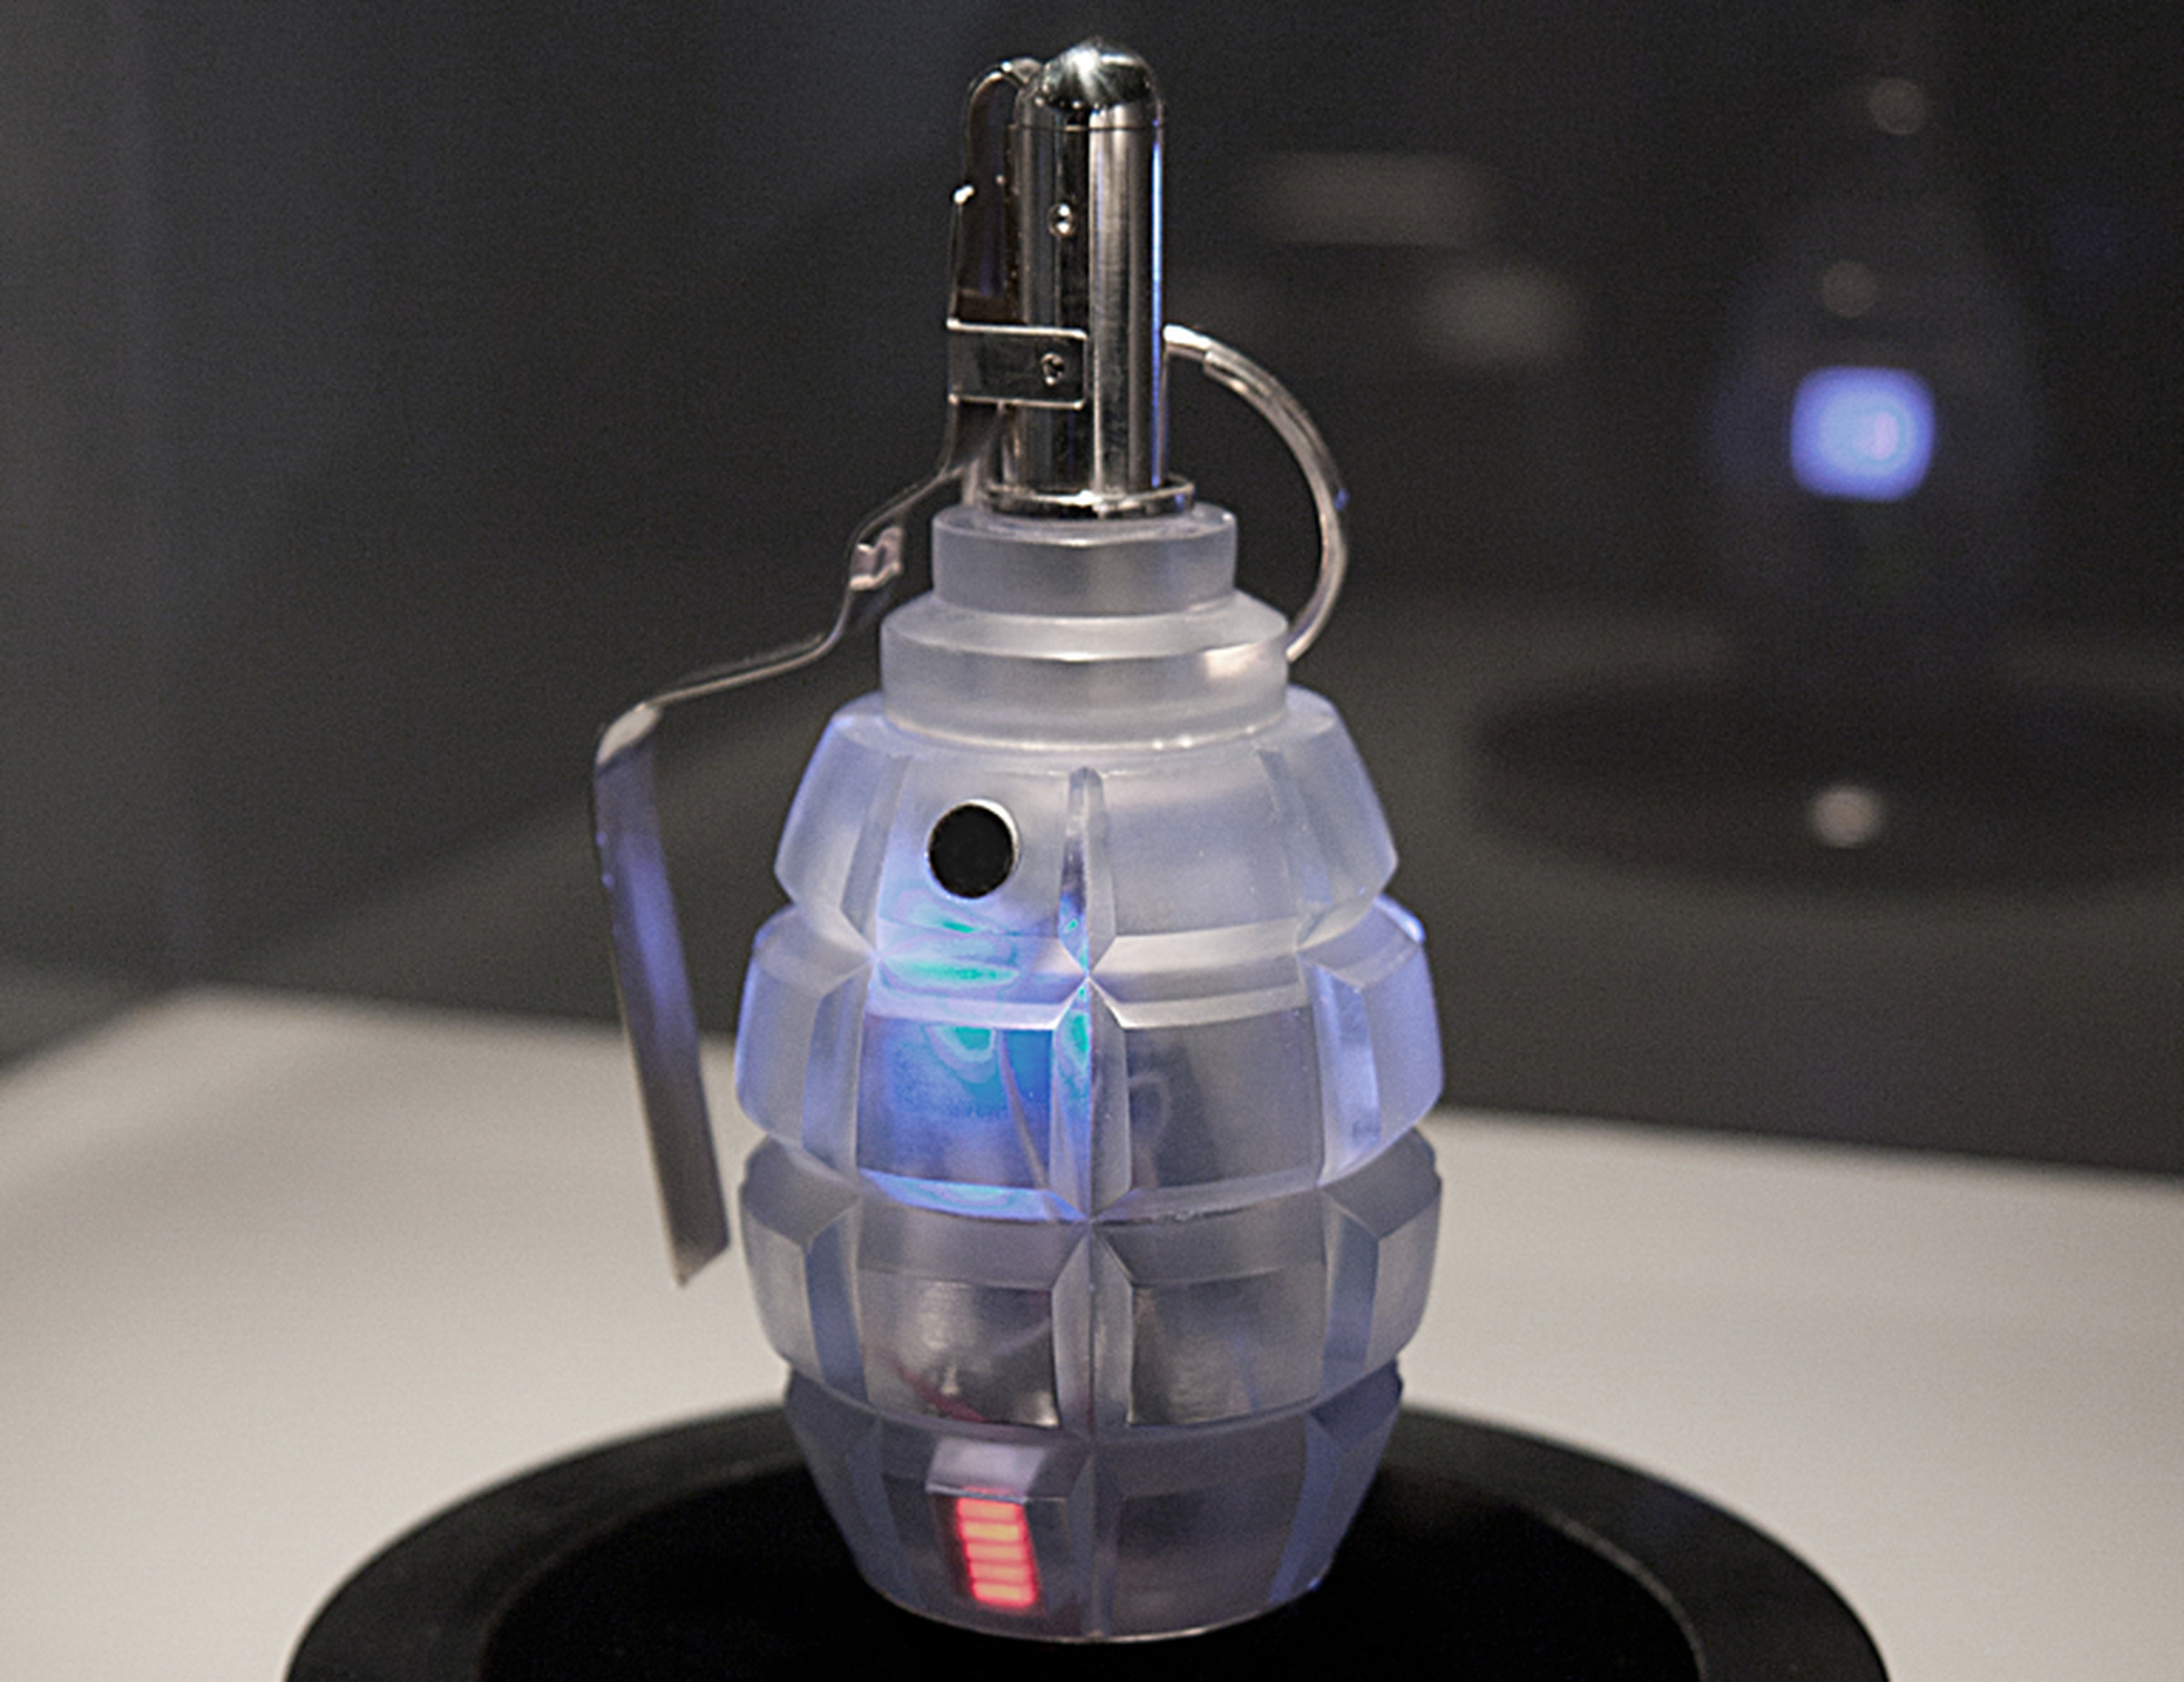 The Transparency Grenade